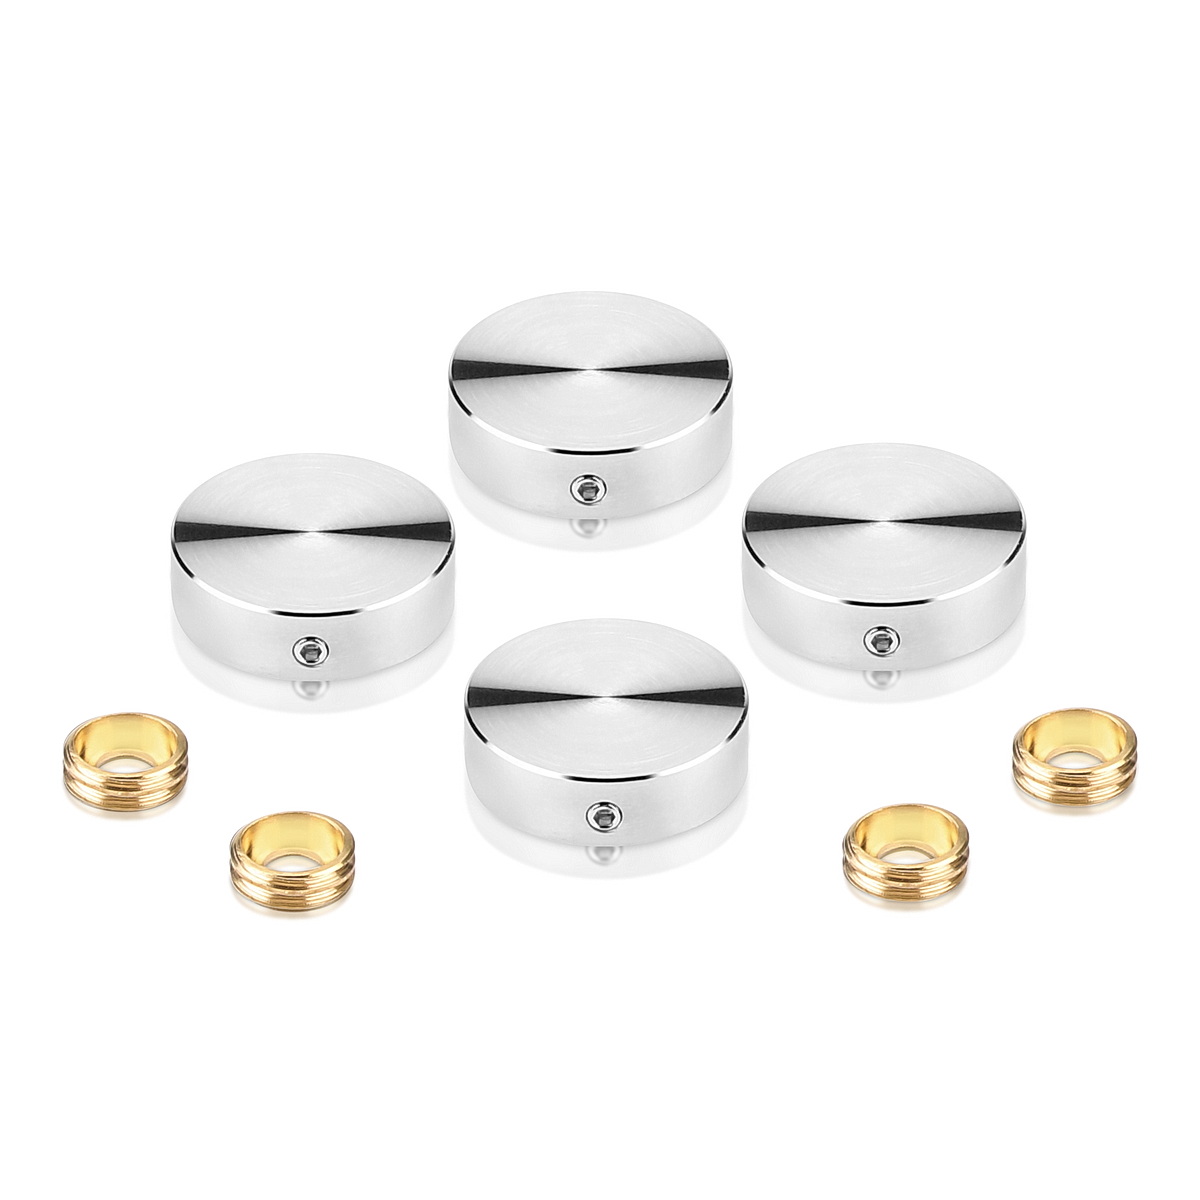 Set of 4 Locking Screw Cover Diameter 7/8'', Satin Brushed Stainless Steel Finish (Indoor Use Only)